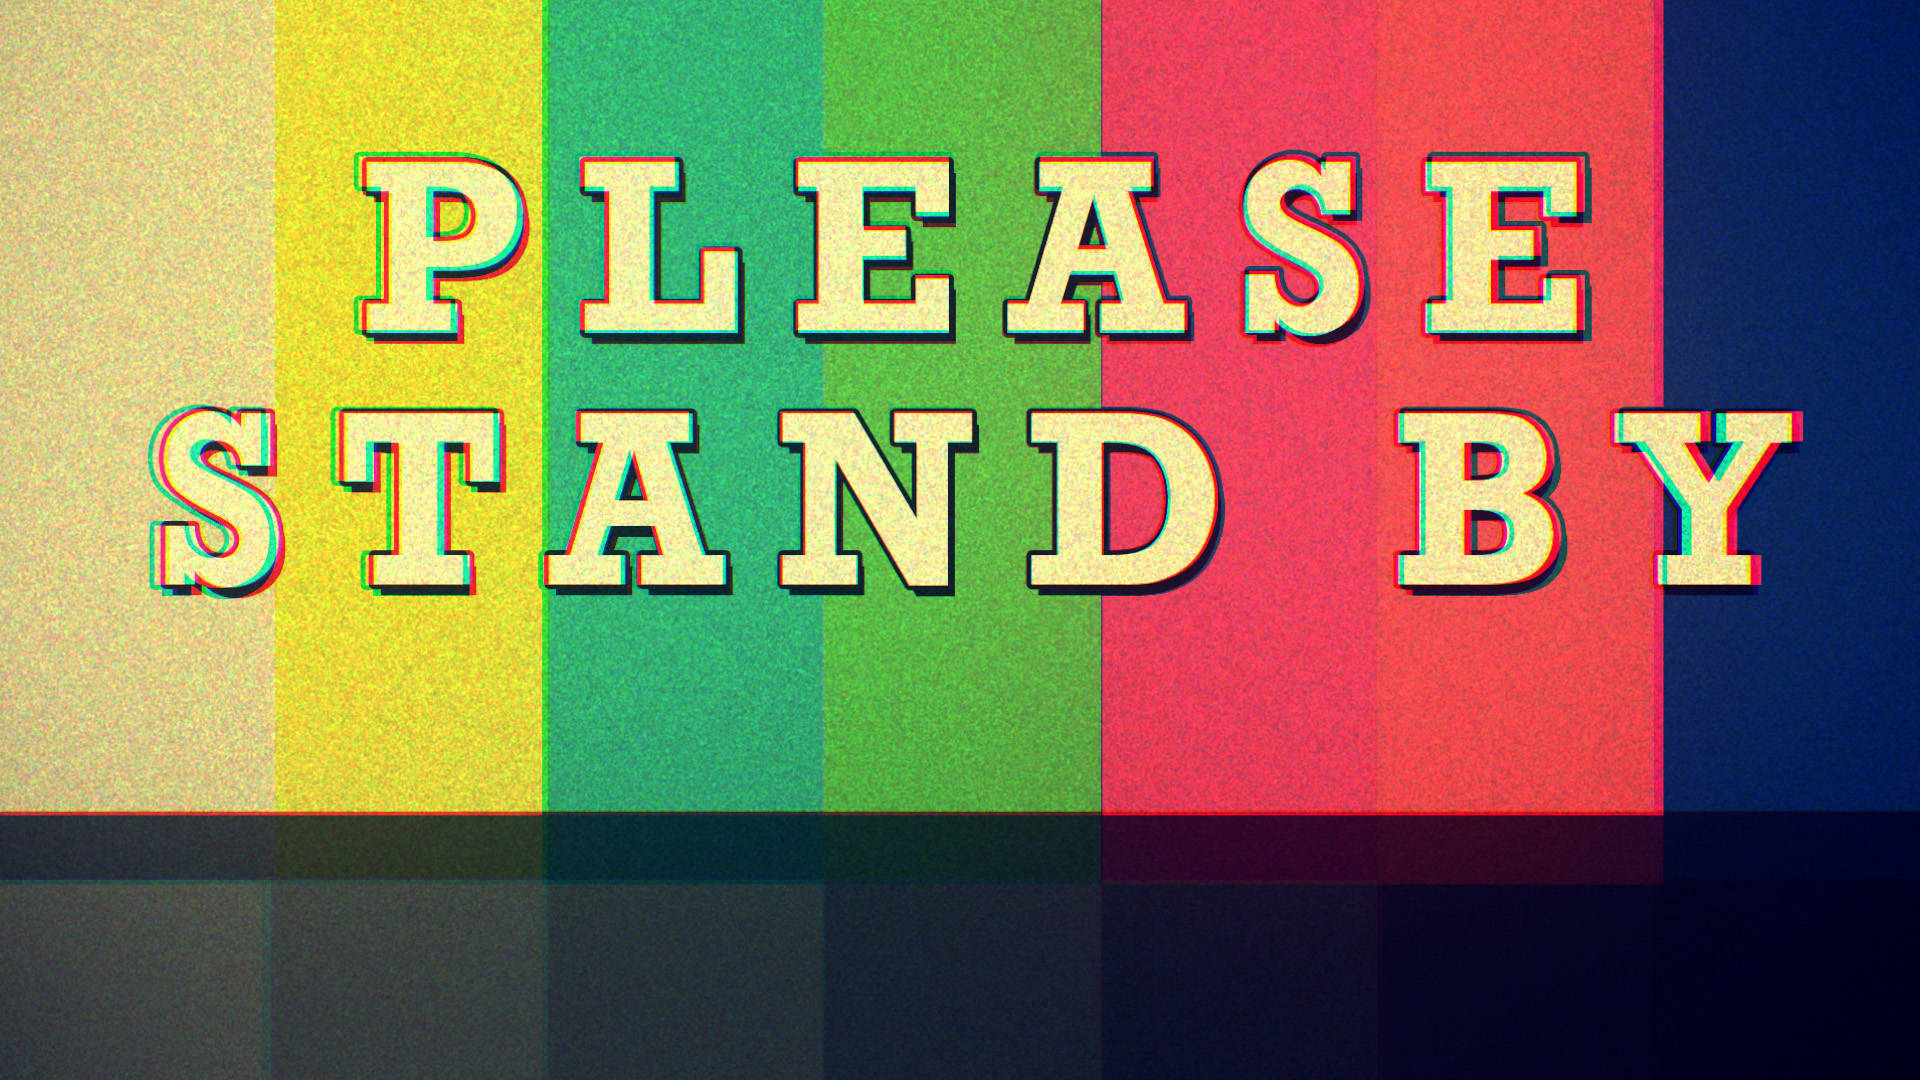 Please Stand By Test Screen